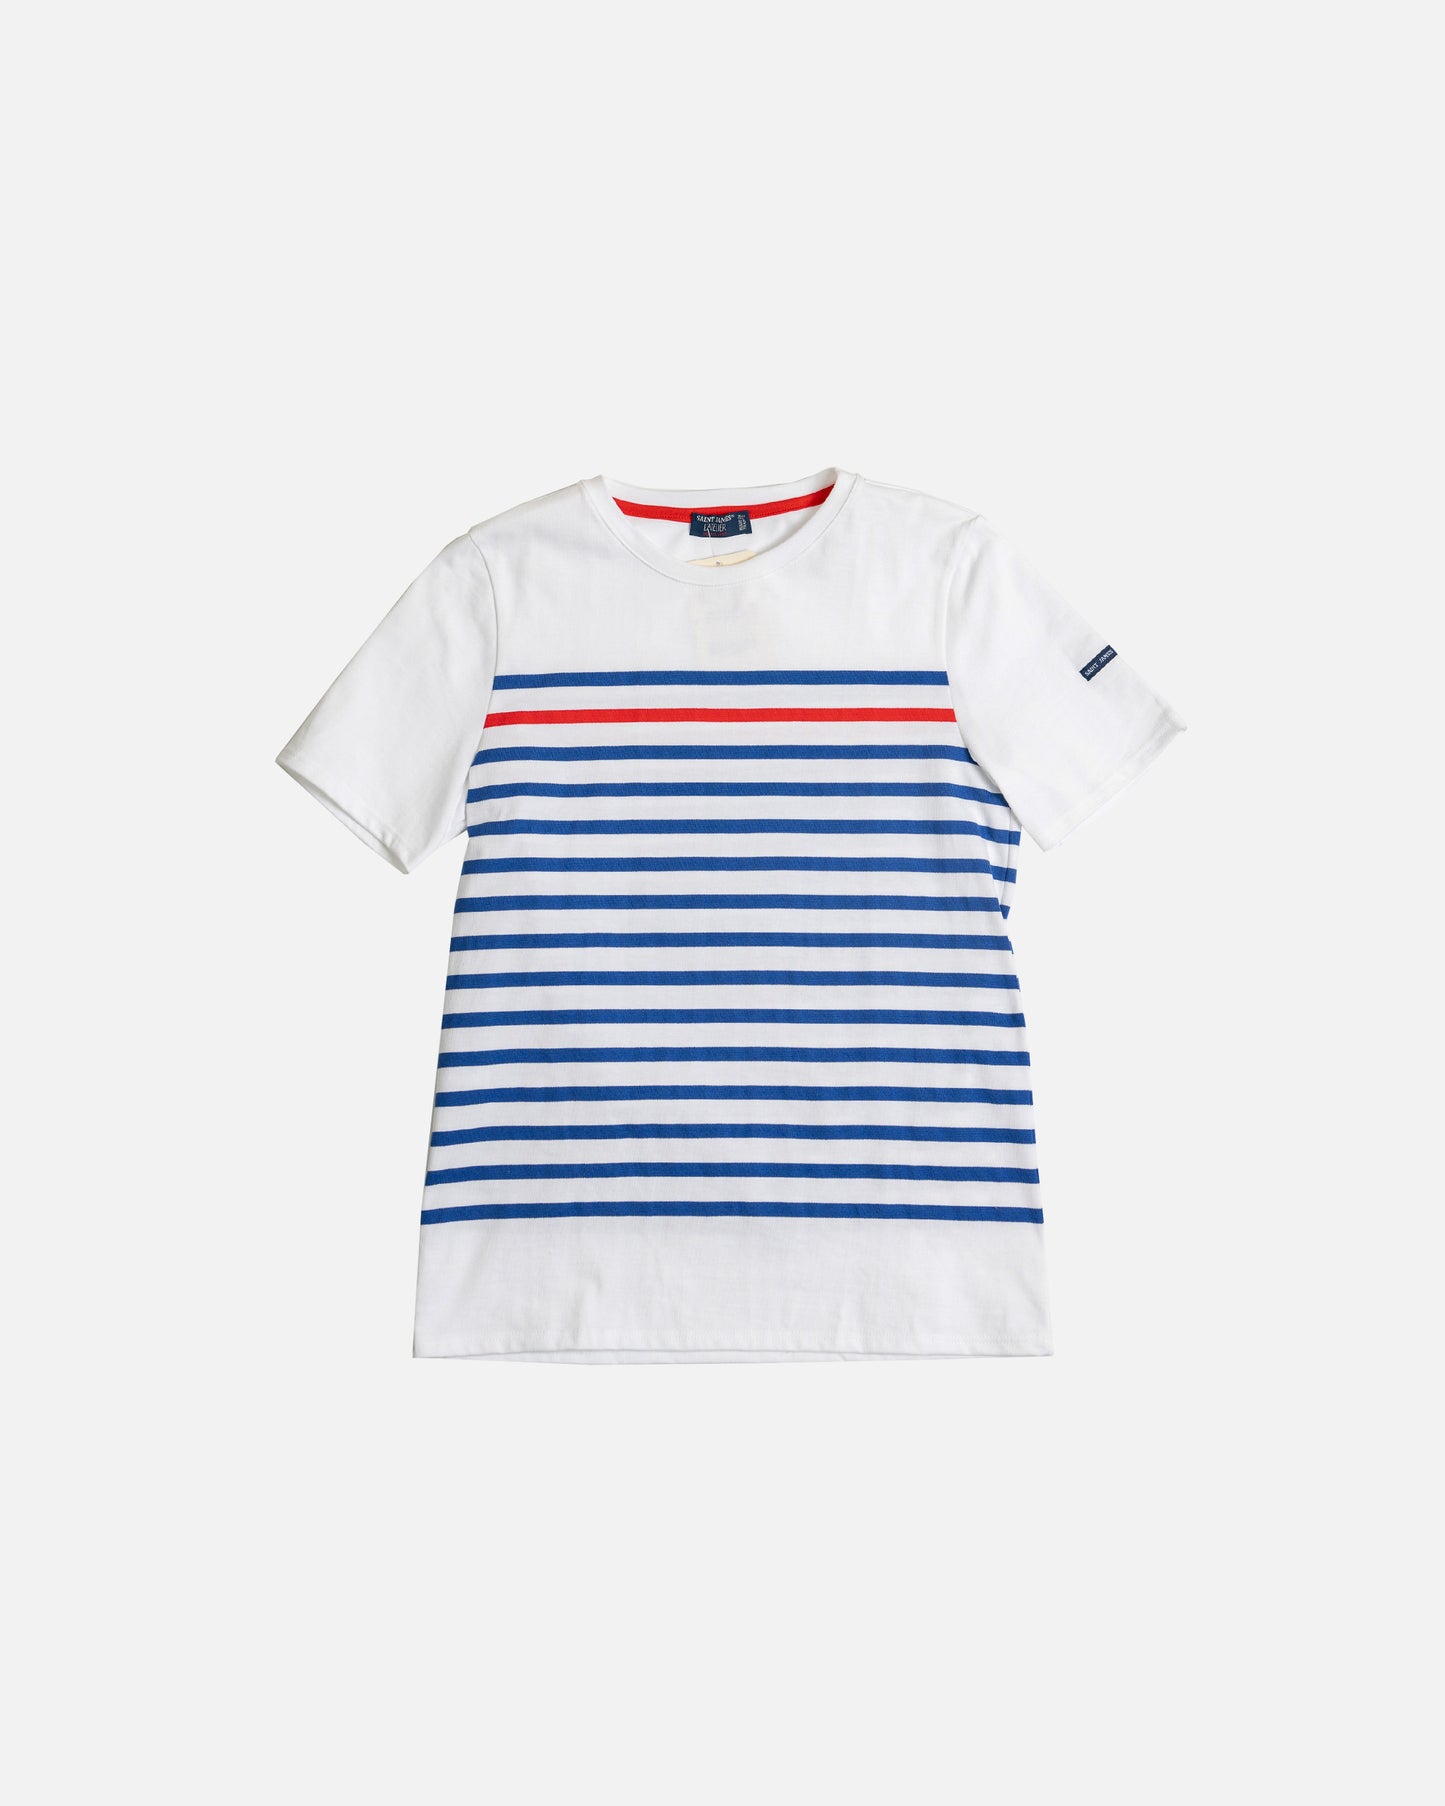 Saint James Short Sleeve Naval Ray Rouge in White/Red/Blue